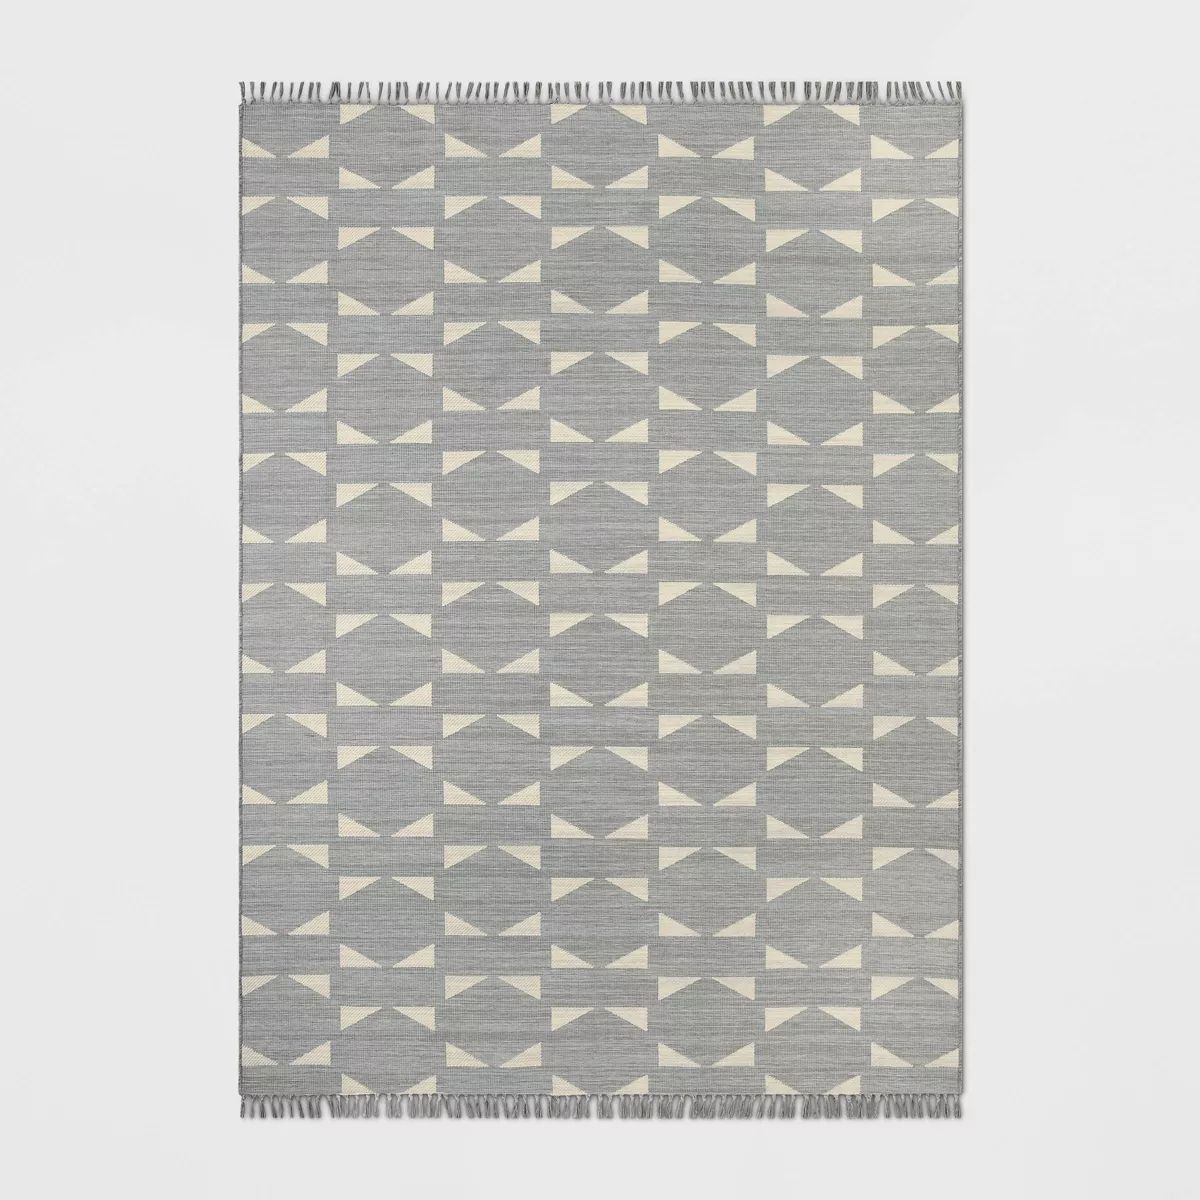 Positive Negative Geo Tapestry Rectangular Woven Outdoor Area Rug Gray - Threshold™ | Target